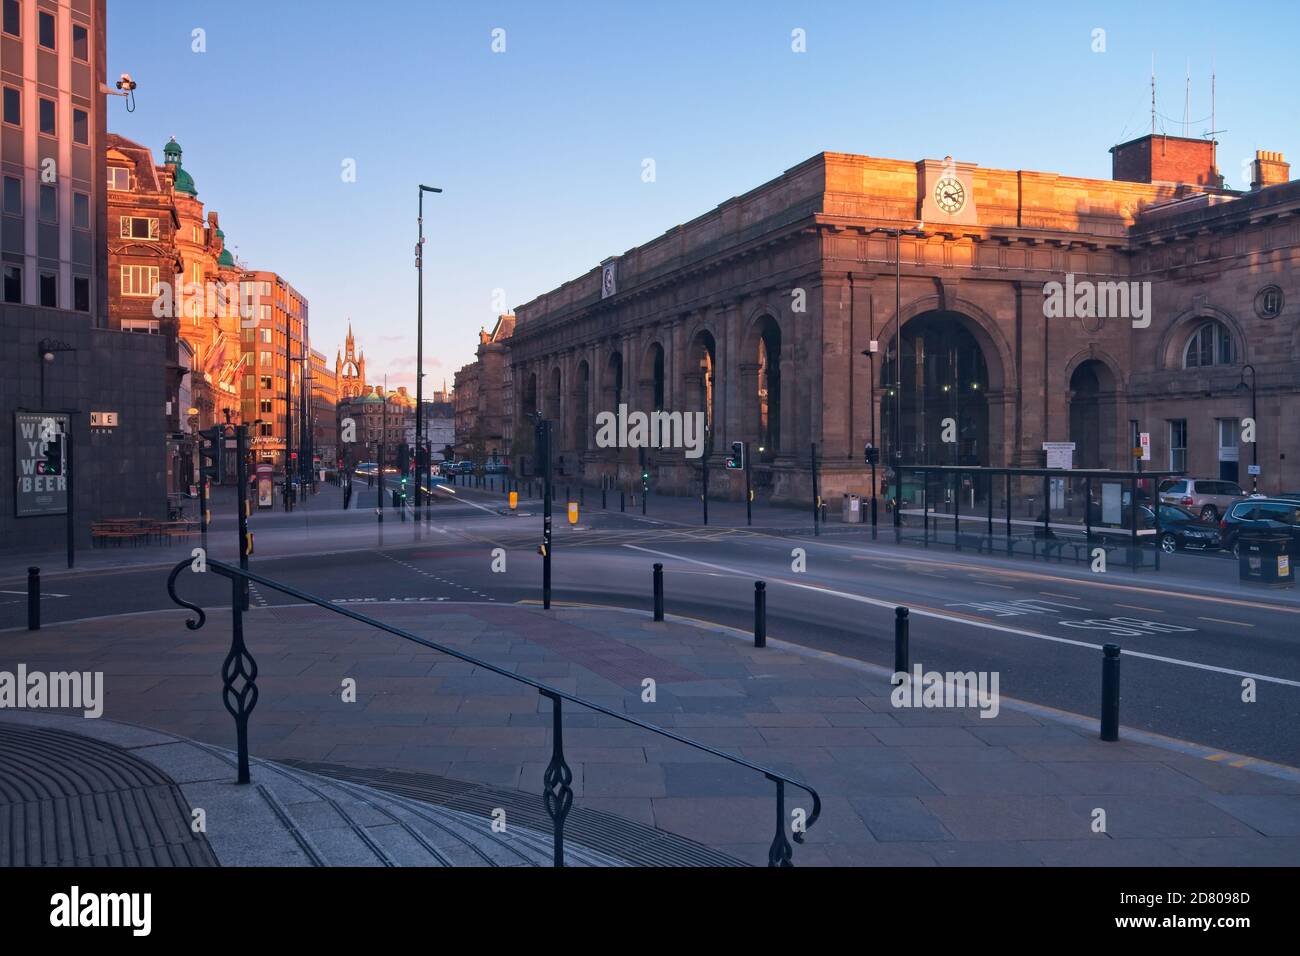 Newcastle Central Station stands on Neville Street in the city centre of Newcastle upon Tyne, Tyne and Wear in North-East England. Stock Photo